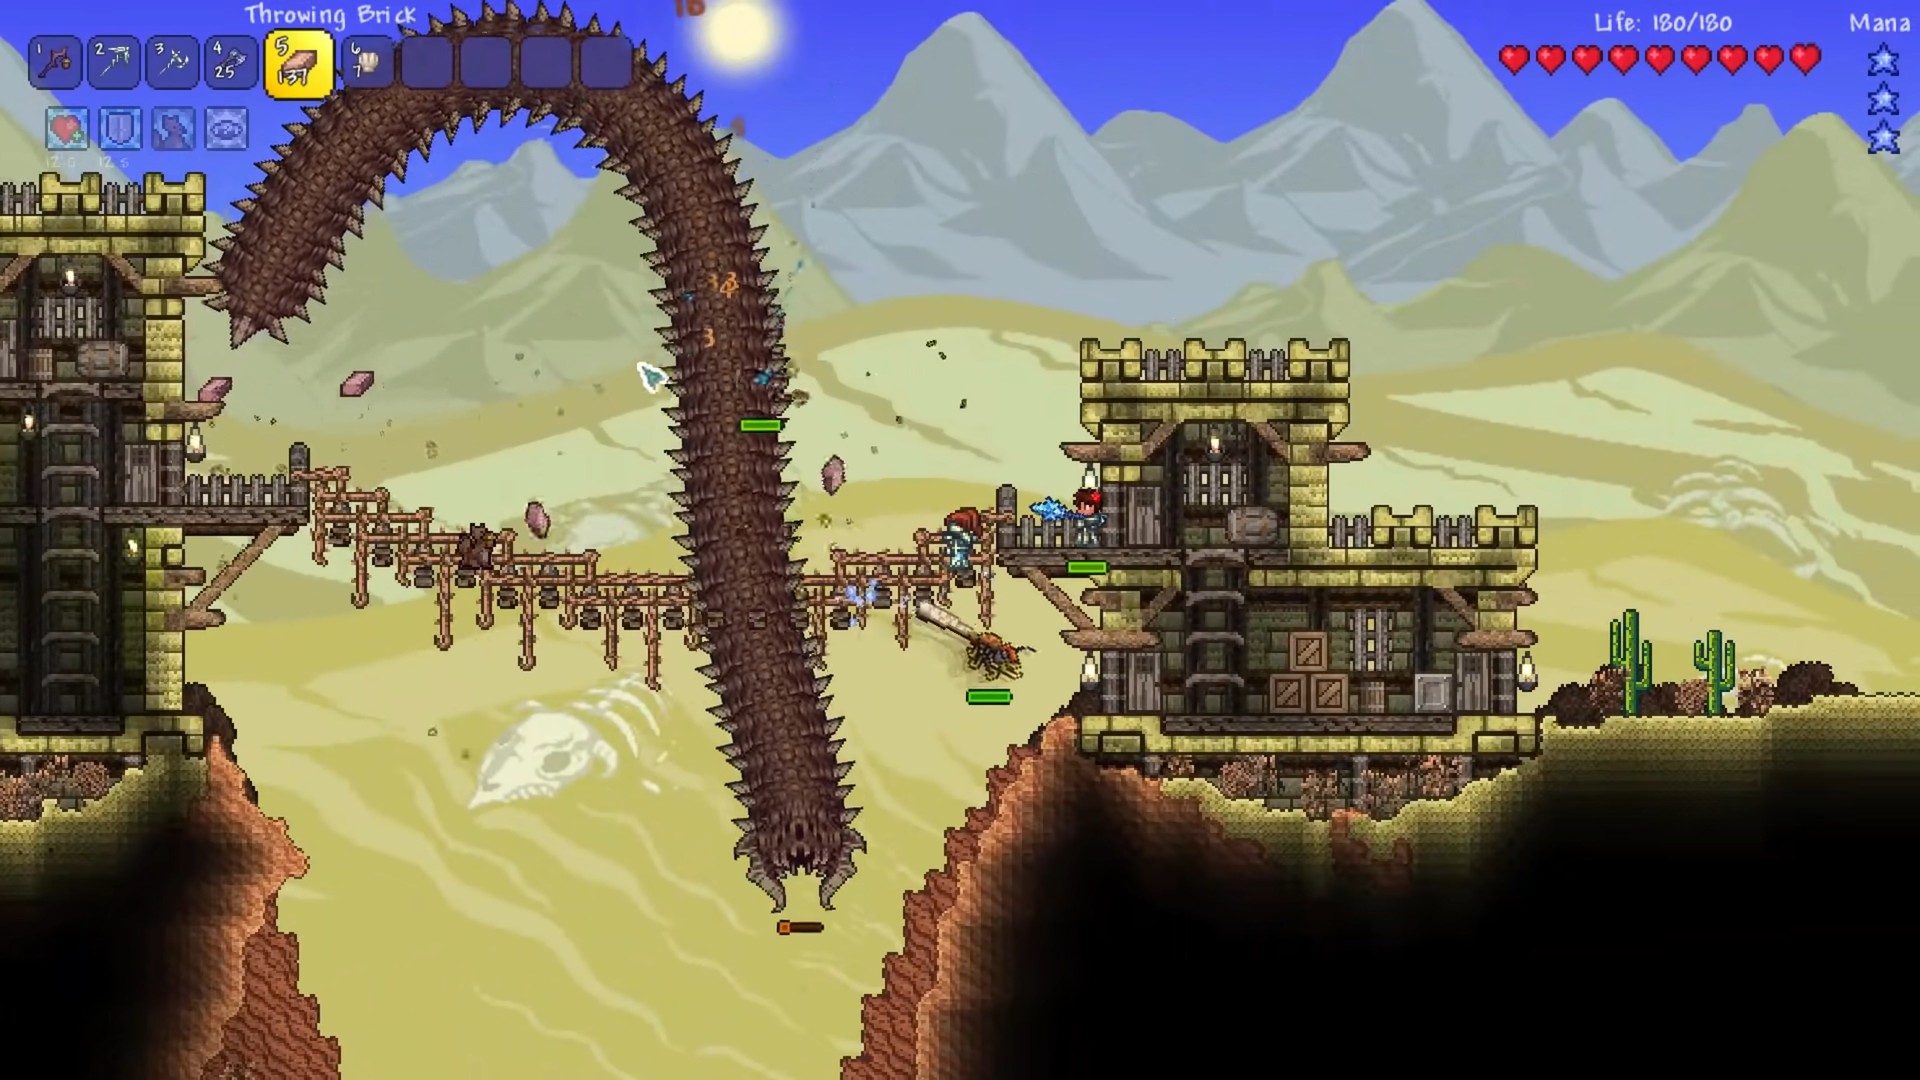 is there a way for mac people to play terraria with steam users